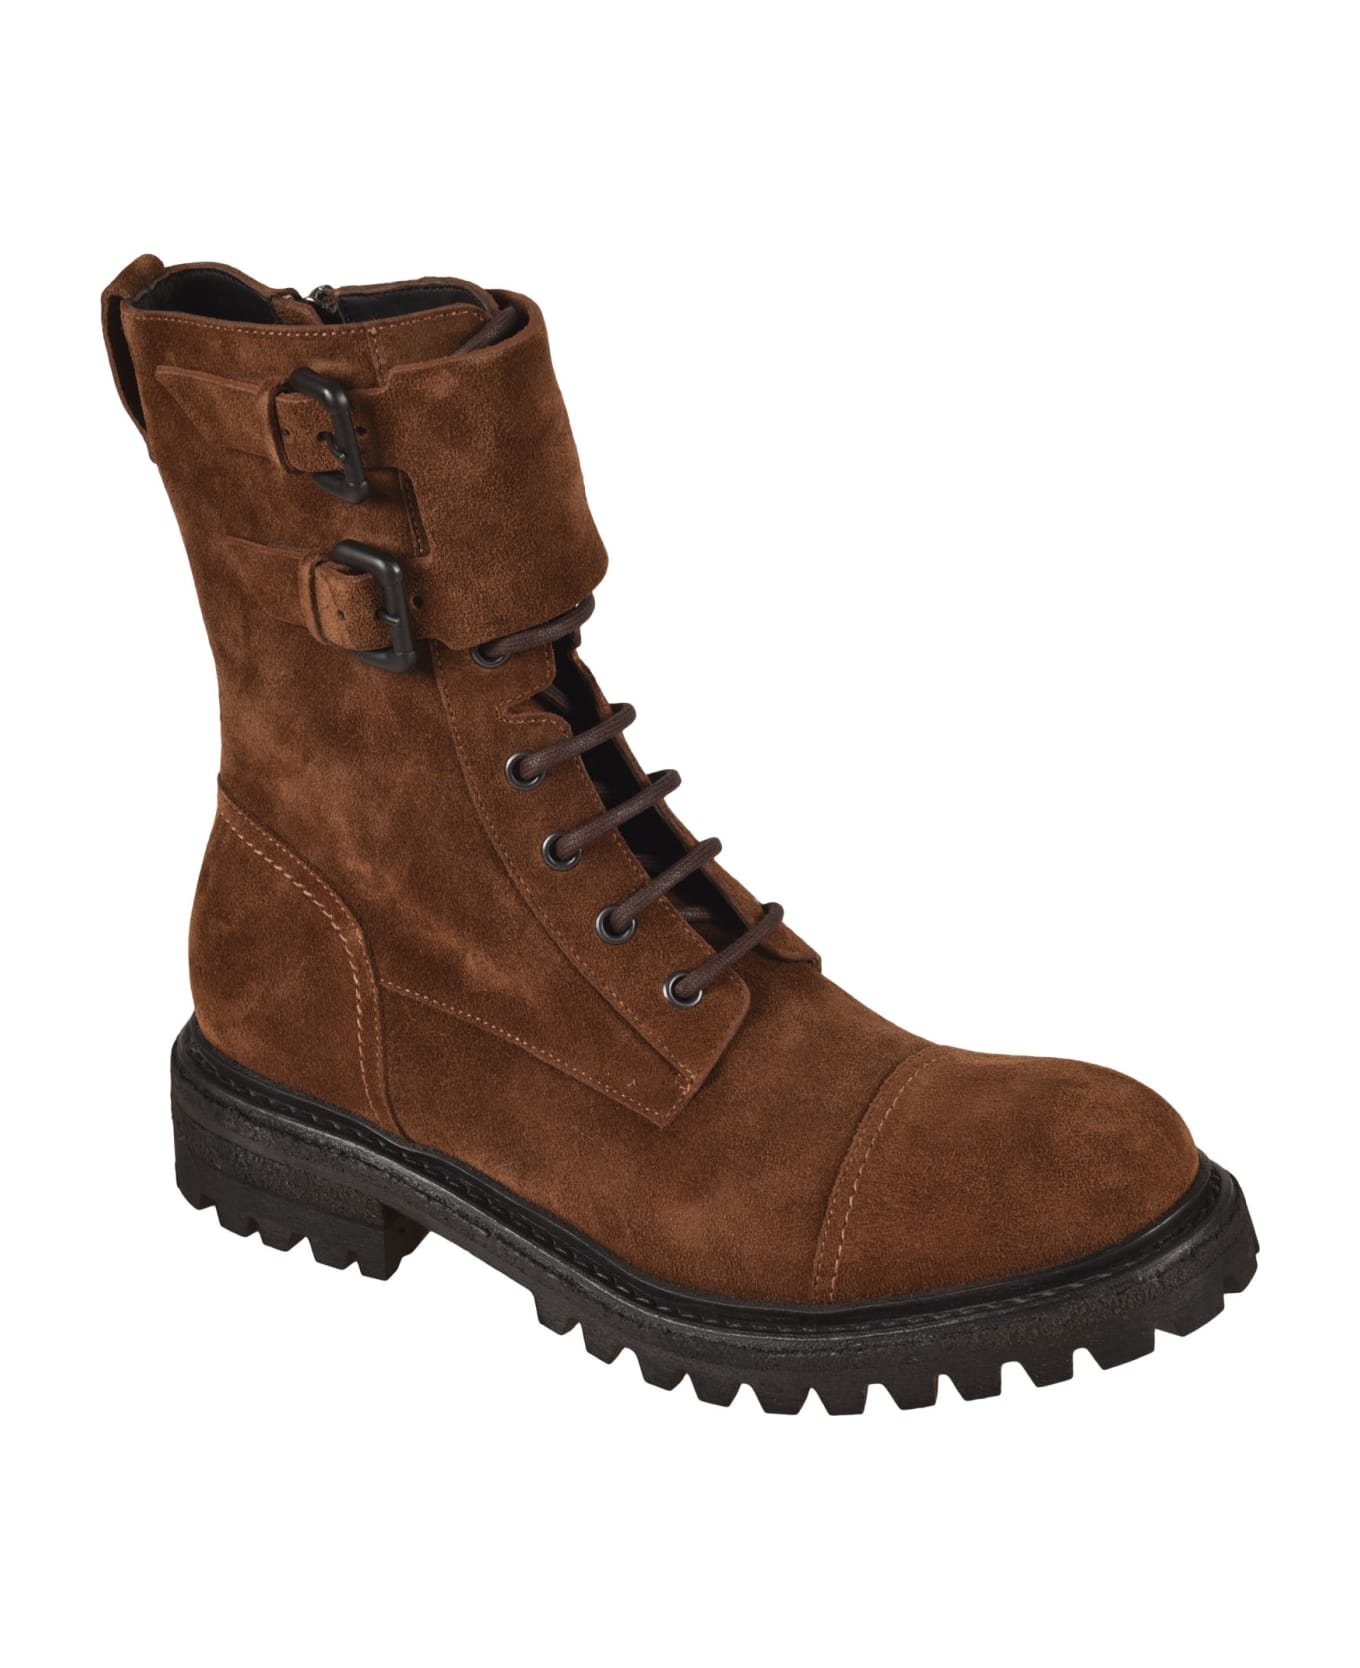 Del Carlo Take Kaleido Lace-up Boots - Brown